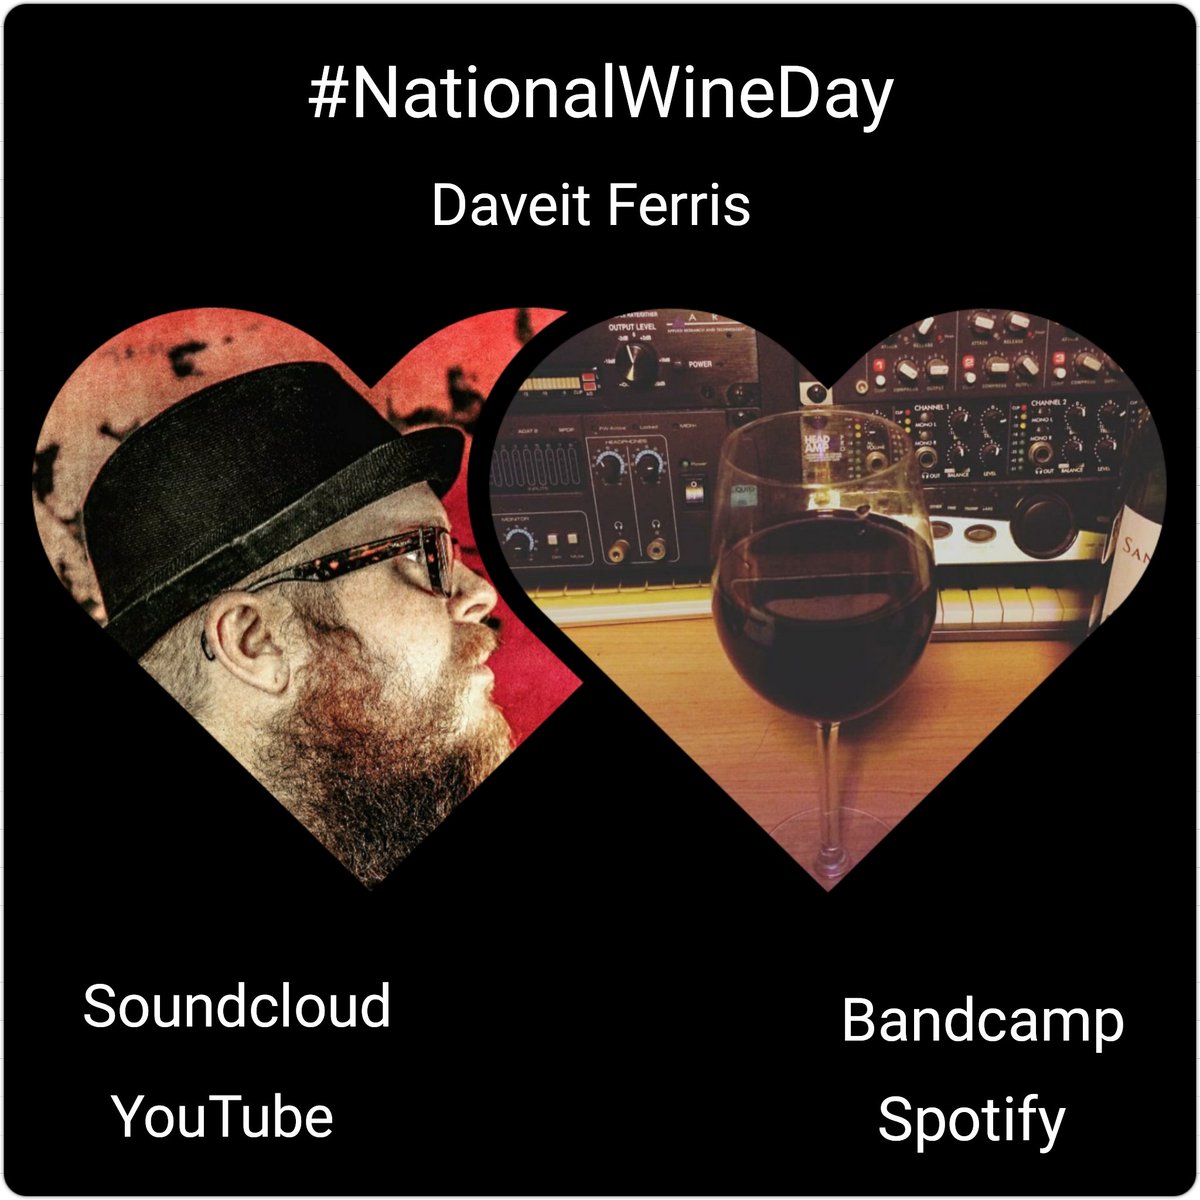 #NationalWineDay Spend some time chilling with your fav wine & enjoying the intoxicating music of #DaveitFerris! The best of both worlds. #wine #wineday soundcloud.com/daveitferris daveitferris.bandcamp.com m.youtube.com/channel/UCpKbj… open.spotify.com/artist/2xXLh8k… daveitferris.com